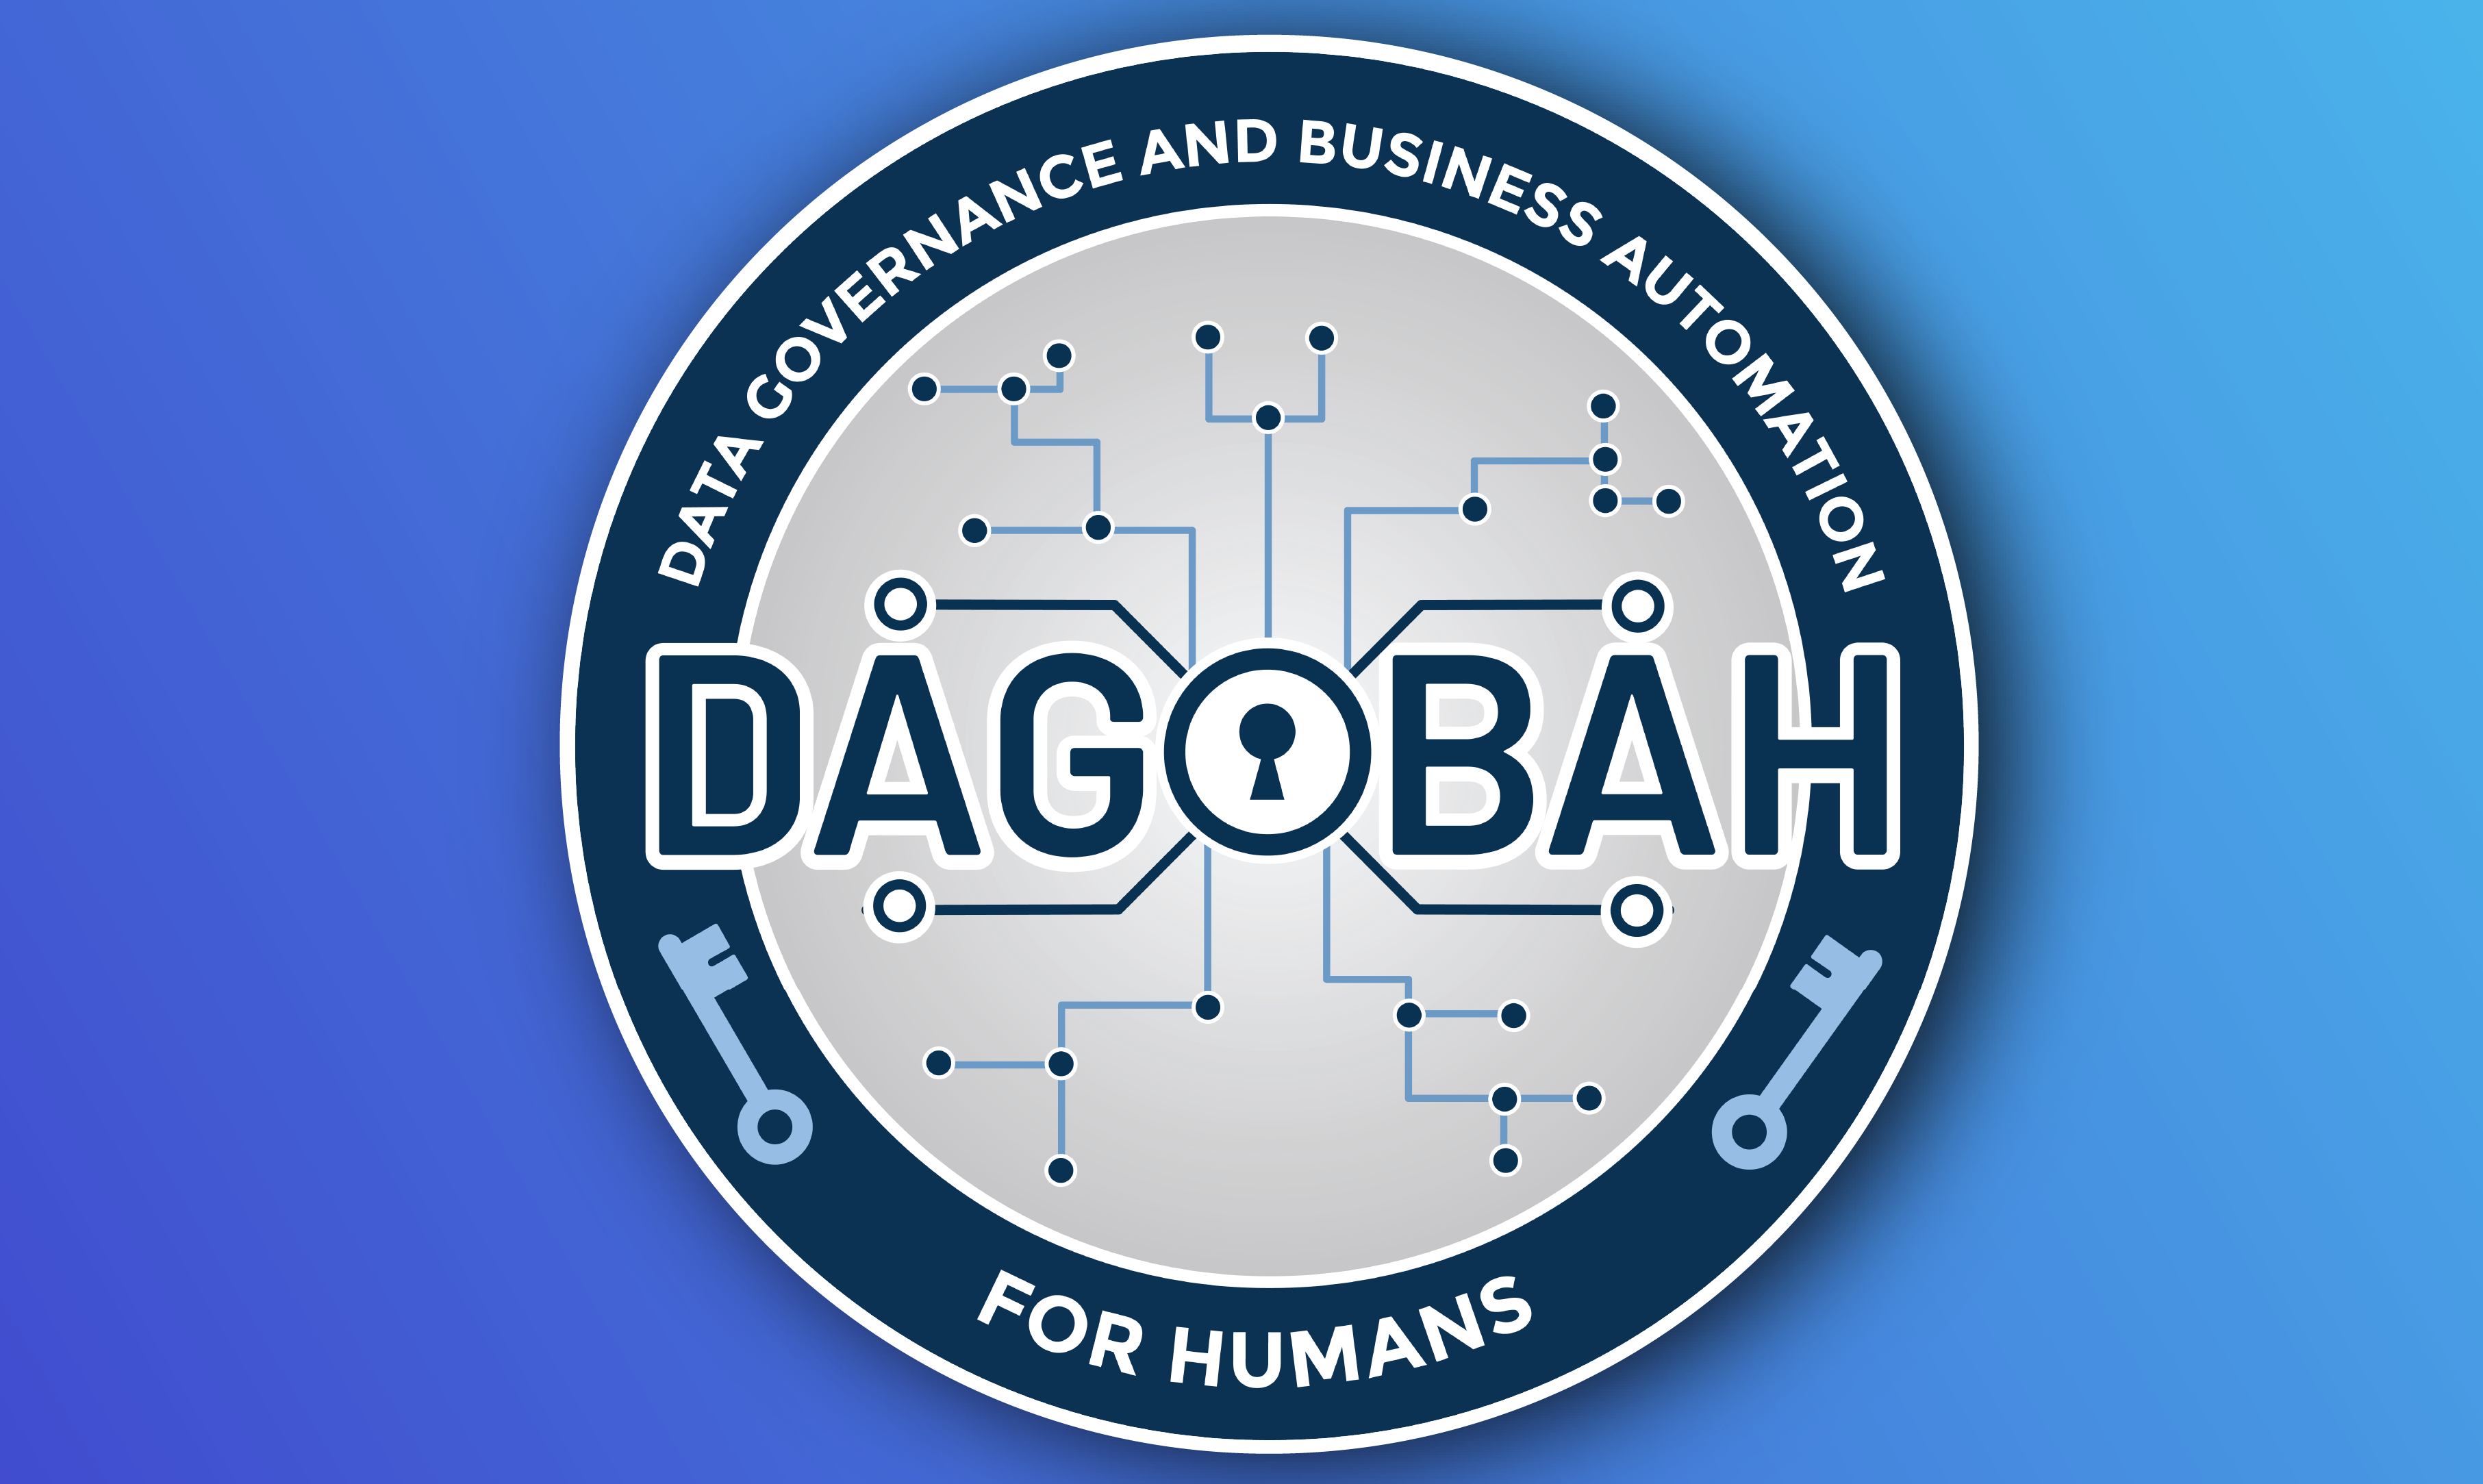 DAGOBAH: Data Governance and Business Automation for Humans